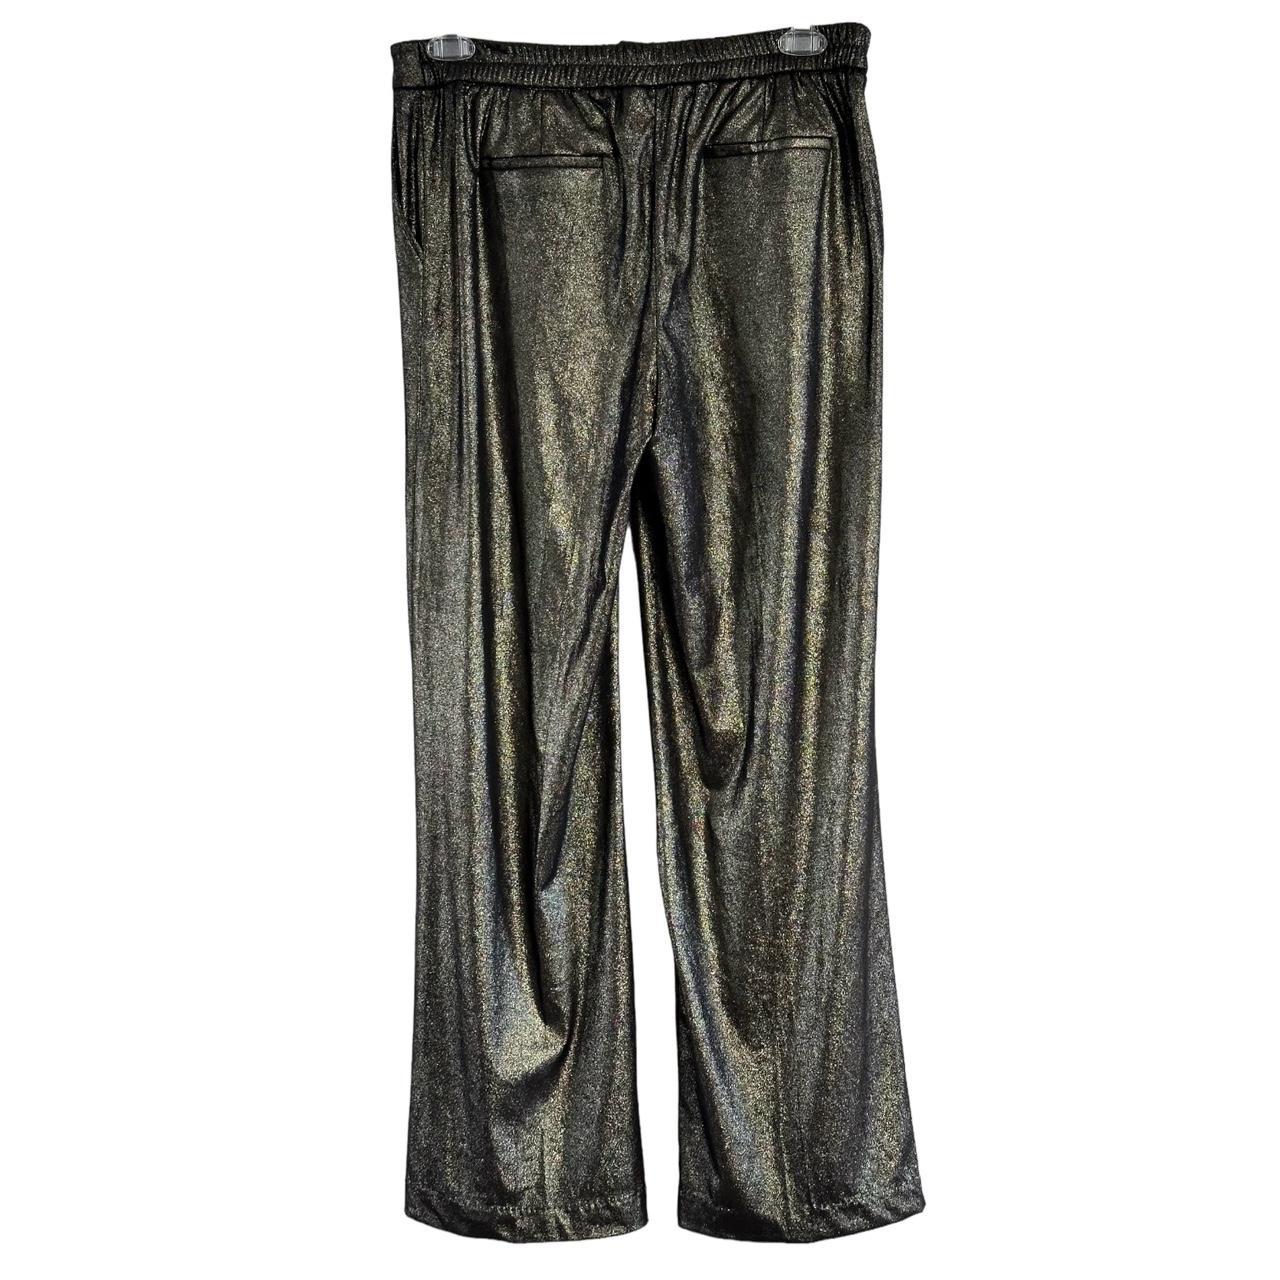 Joie Women's Black and Gold Trousers (4)